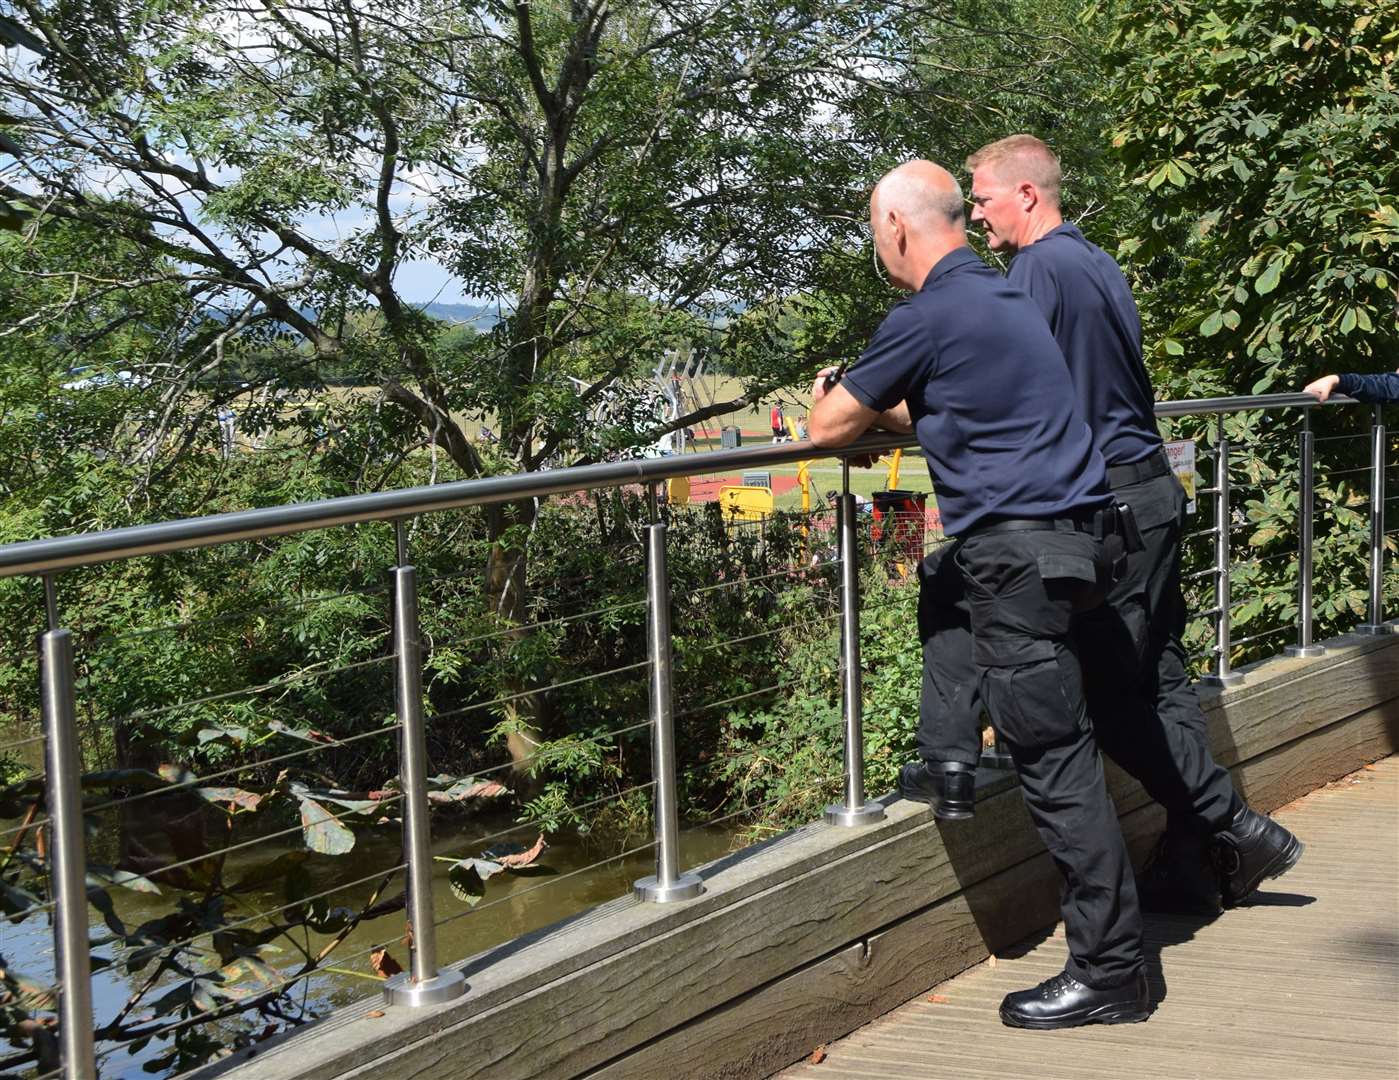 Police, firefighters and search teams were by the river